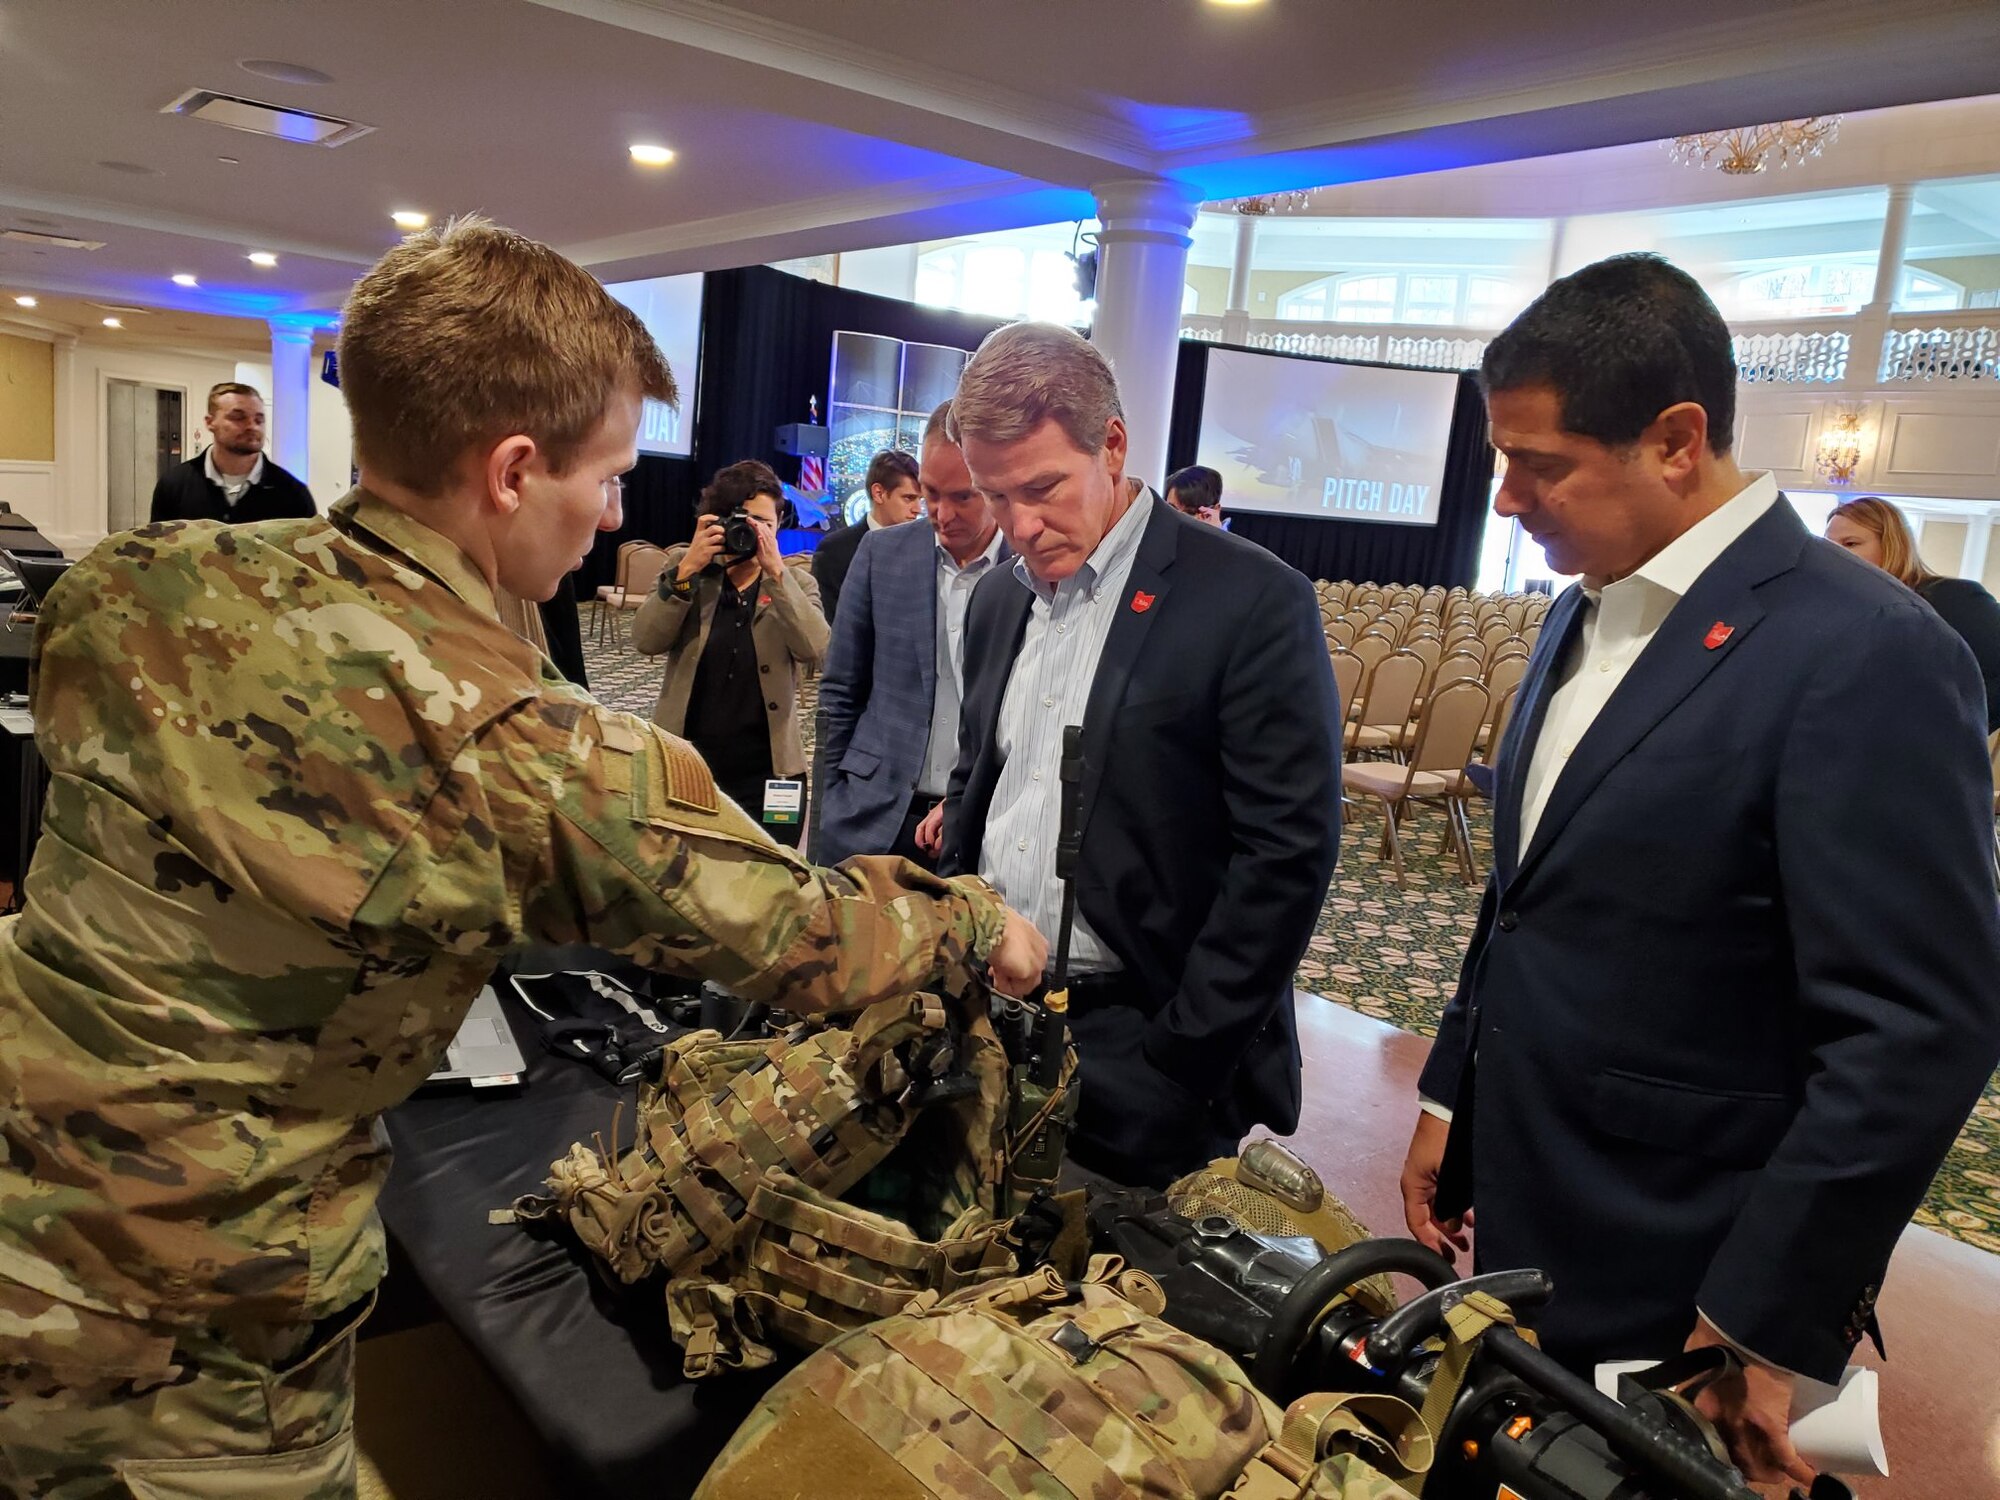 1st Lt Patrick Assef (left) a special warfare mechanical engineer with the Air Force Research Laboratory, explains several Air Force programs to Lt. Governor Jon Husted (center) of Ohio during the Air Force Life Cycle Management Center's Pitch Day Nov.13-14, 2019